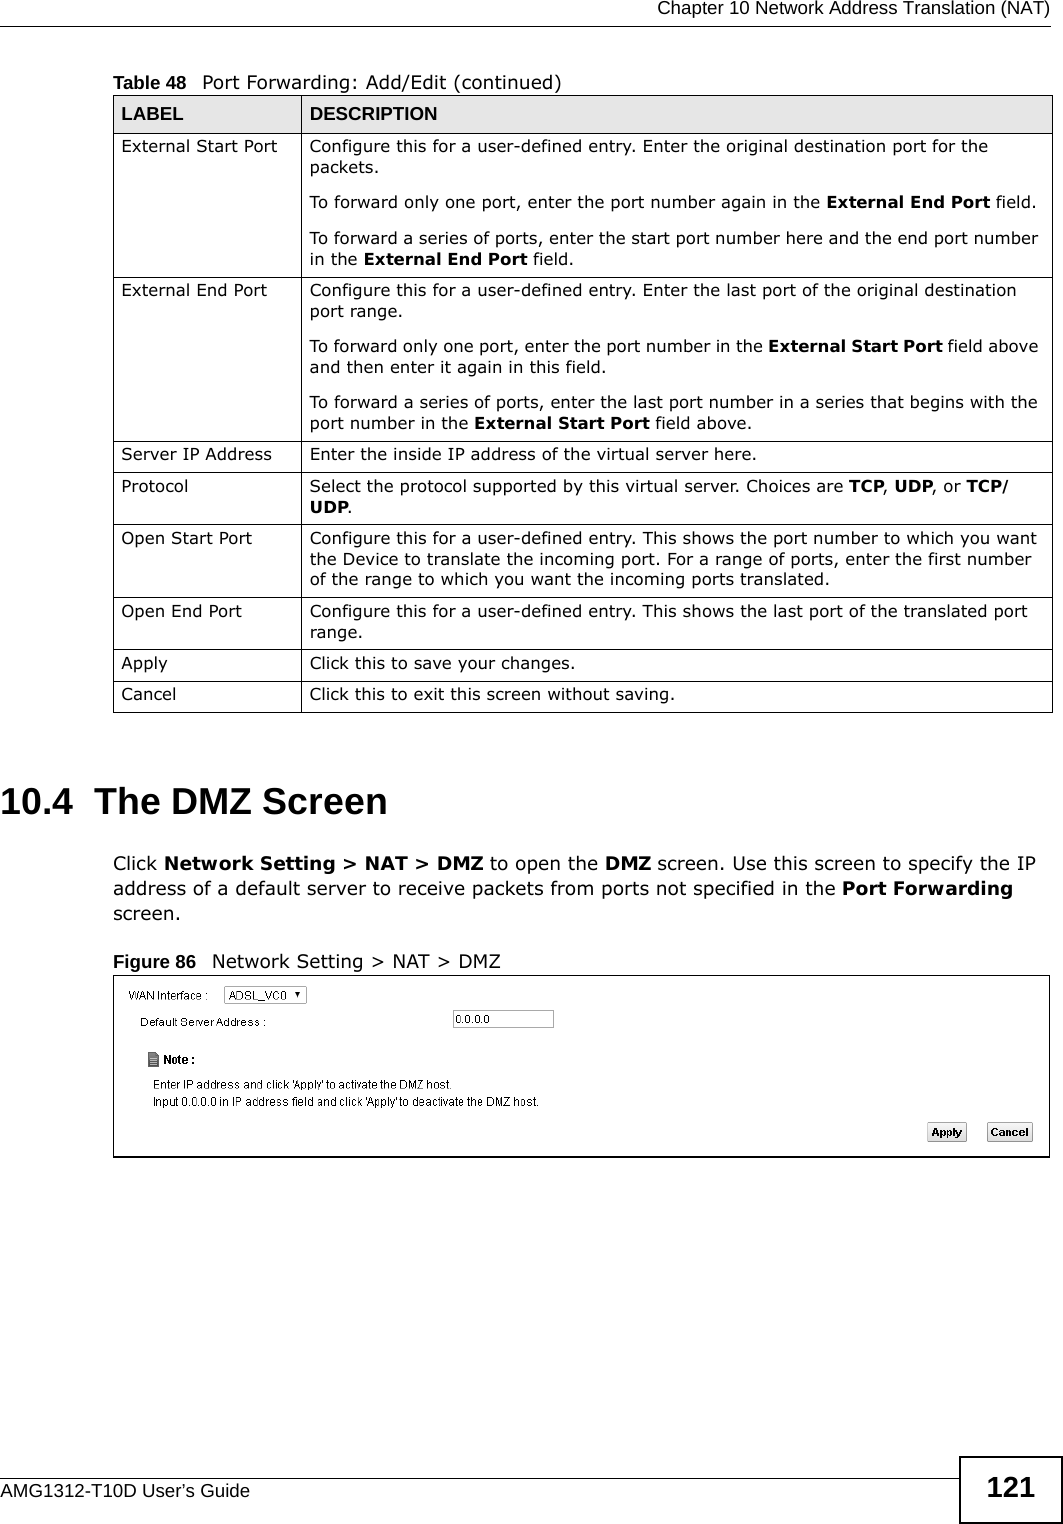  Chapter 10 Network Address Translation (NAT)AMG1312-T10D User’s Guide 12110.4  The DMZ ScreenClick Network Setting &gt; NAT &gt; DMZ to open the DMZ screen. Use this screen to specify the IP address of a default server to receive packets from ports not specified in the Port Forwarding screen.Figure 86   Network Setting &gt; NAT &gt; DMZ External Start Port Configure this for a user-defined entry. Enter the original destination port for the packets.To forward only one port, enter the port number again in the External End Port field. To forward a series of ports, enter the start port number here and the end port number in the External End Port field.External End Port  Configure this for a user-defined entry. Enter the last port of the original destination port range. To forward only one port, enter the port number in the External Start Port field above and then enter it again in this field. To forward a series of ports, enter the last port number in a series that begins with the port number in the External Start Port field above.Server IP Address Enter the inside IP address of the virtual server here.Protocol Select the protocol supported by this virtual server. Choices are TCP, UDP, or TCP/UDP.Open Start Port Configure this for a user-defined entry. This shows the port number to which you want the Device to translate the incoming port. For a range of ports, enter the first number of the range to which you want the incoming ports translated.Open End Port  Configure this for a user-defined entry. This shows the last port of the translated port range.Apply Click this to save your changes.Cancel Click this to exit this screen without saving.Table 48   Port Forwarding: Add/Edit (continued)LABEL DESCRIPTION